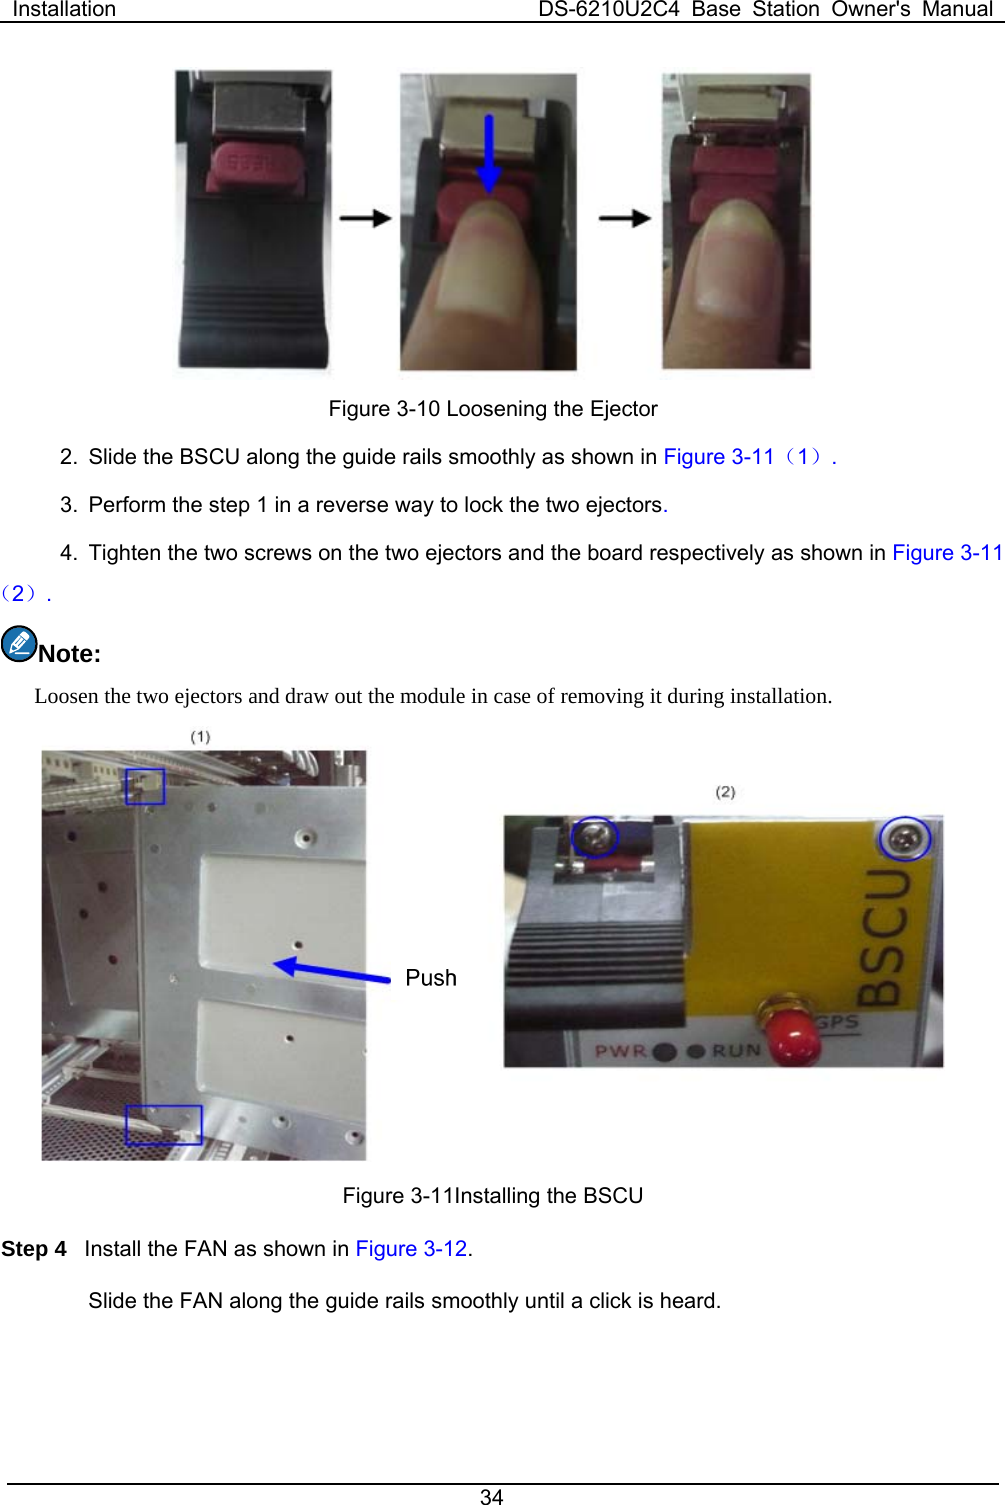 Installation  DS-6210U2C4 Base Station Owner&apos;s Manual 34   Figure 3-10 Loosening the Ejector 2.  Slide the BSCU along the guide rails smoothly as shown in Figure 3-11（1）. 3.  Perform the step 1 in a reverse way to lock the two ejectors.   4.  Tighten the two screws on the two ejectors and the board respectively as shown in Figure 3-11（2）. Note:  Loosen the two ejectors and draw out the module in case of removing it during installation.    Figure 3-11Installing the BSCU   Step 4  Install the FAN as shown in Figure 3-12. Slide the FAN along the guide rails smoothly until a click is heard.   